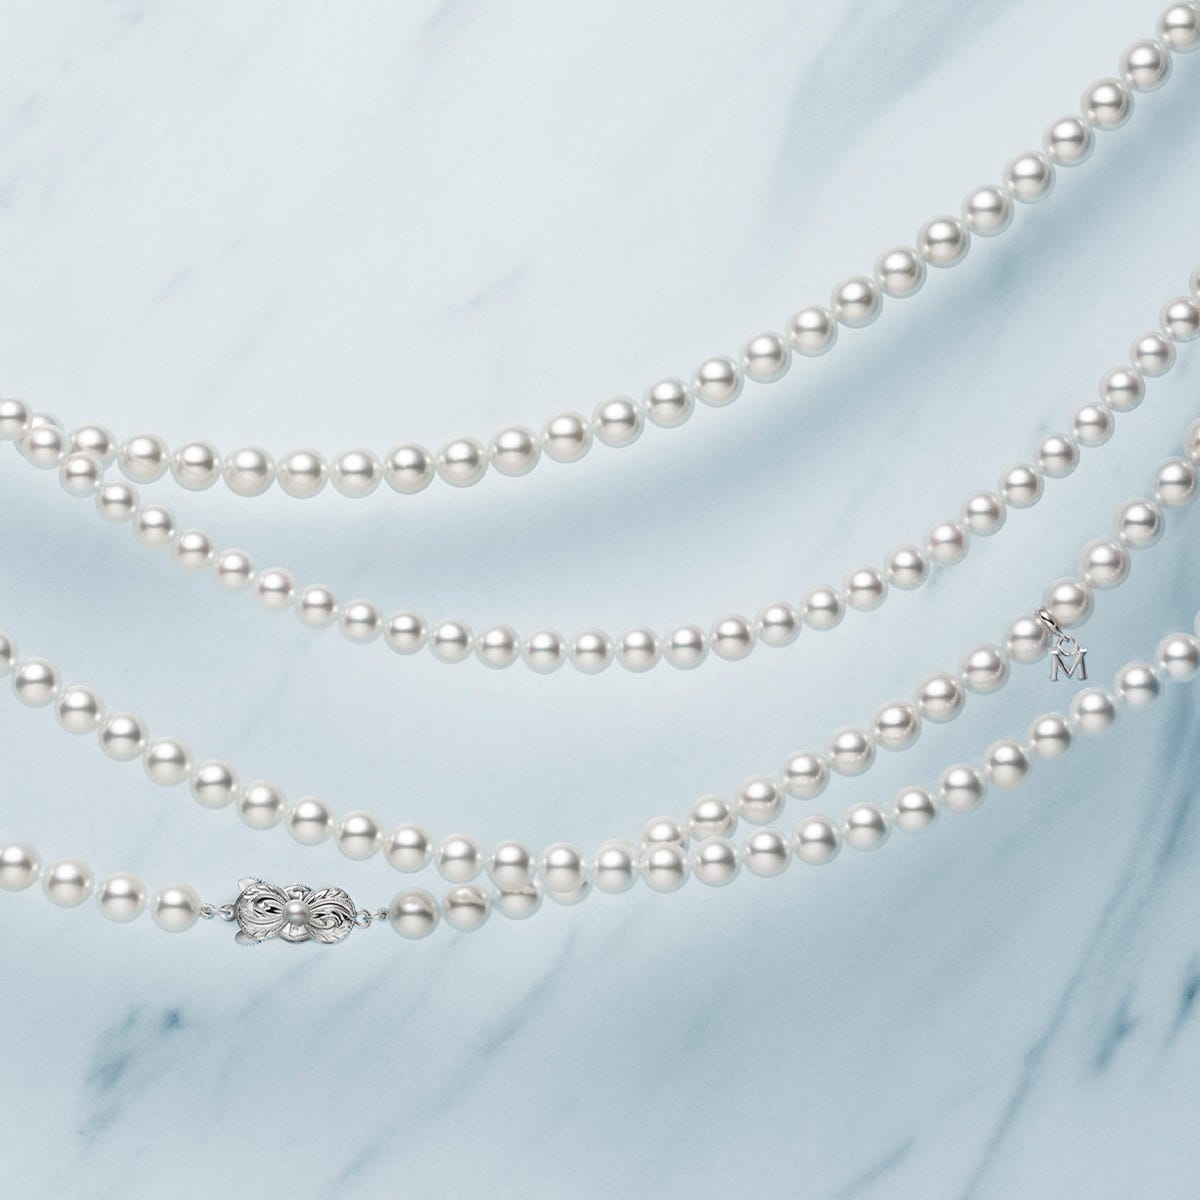 The most luminous of all, “Mikimoto Pearl”